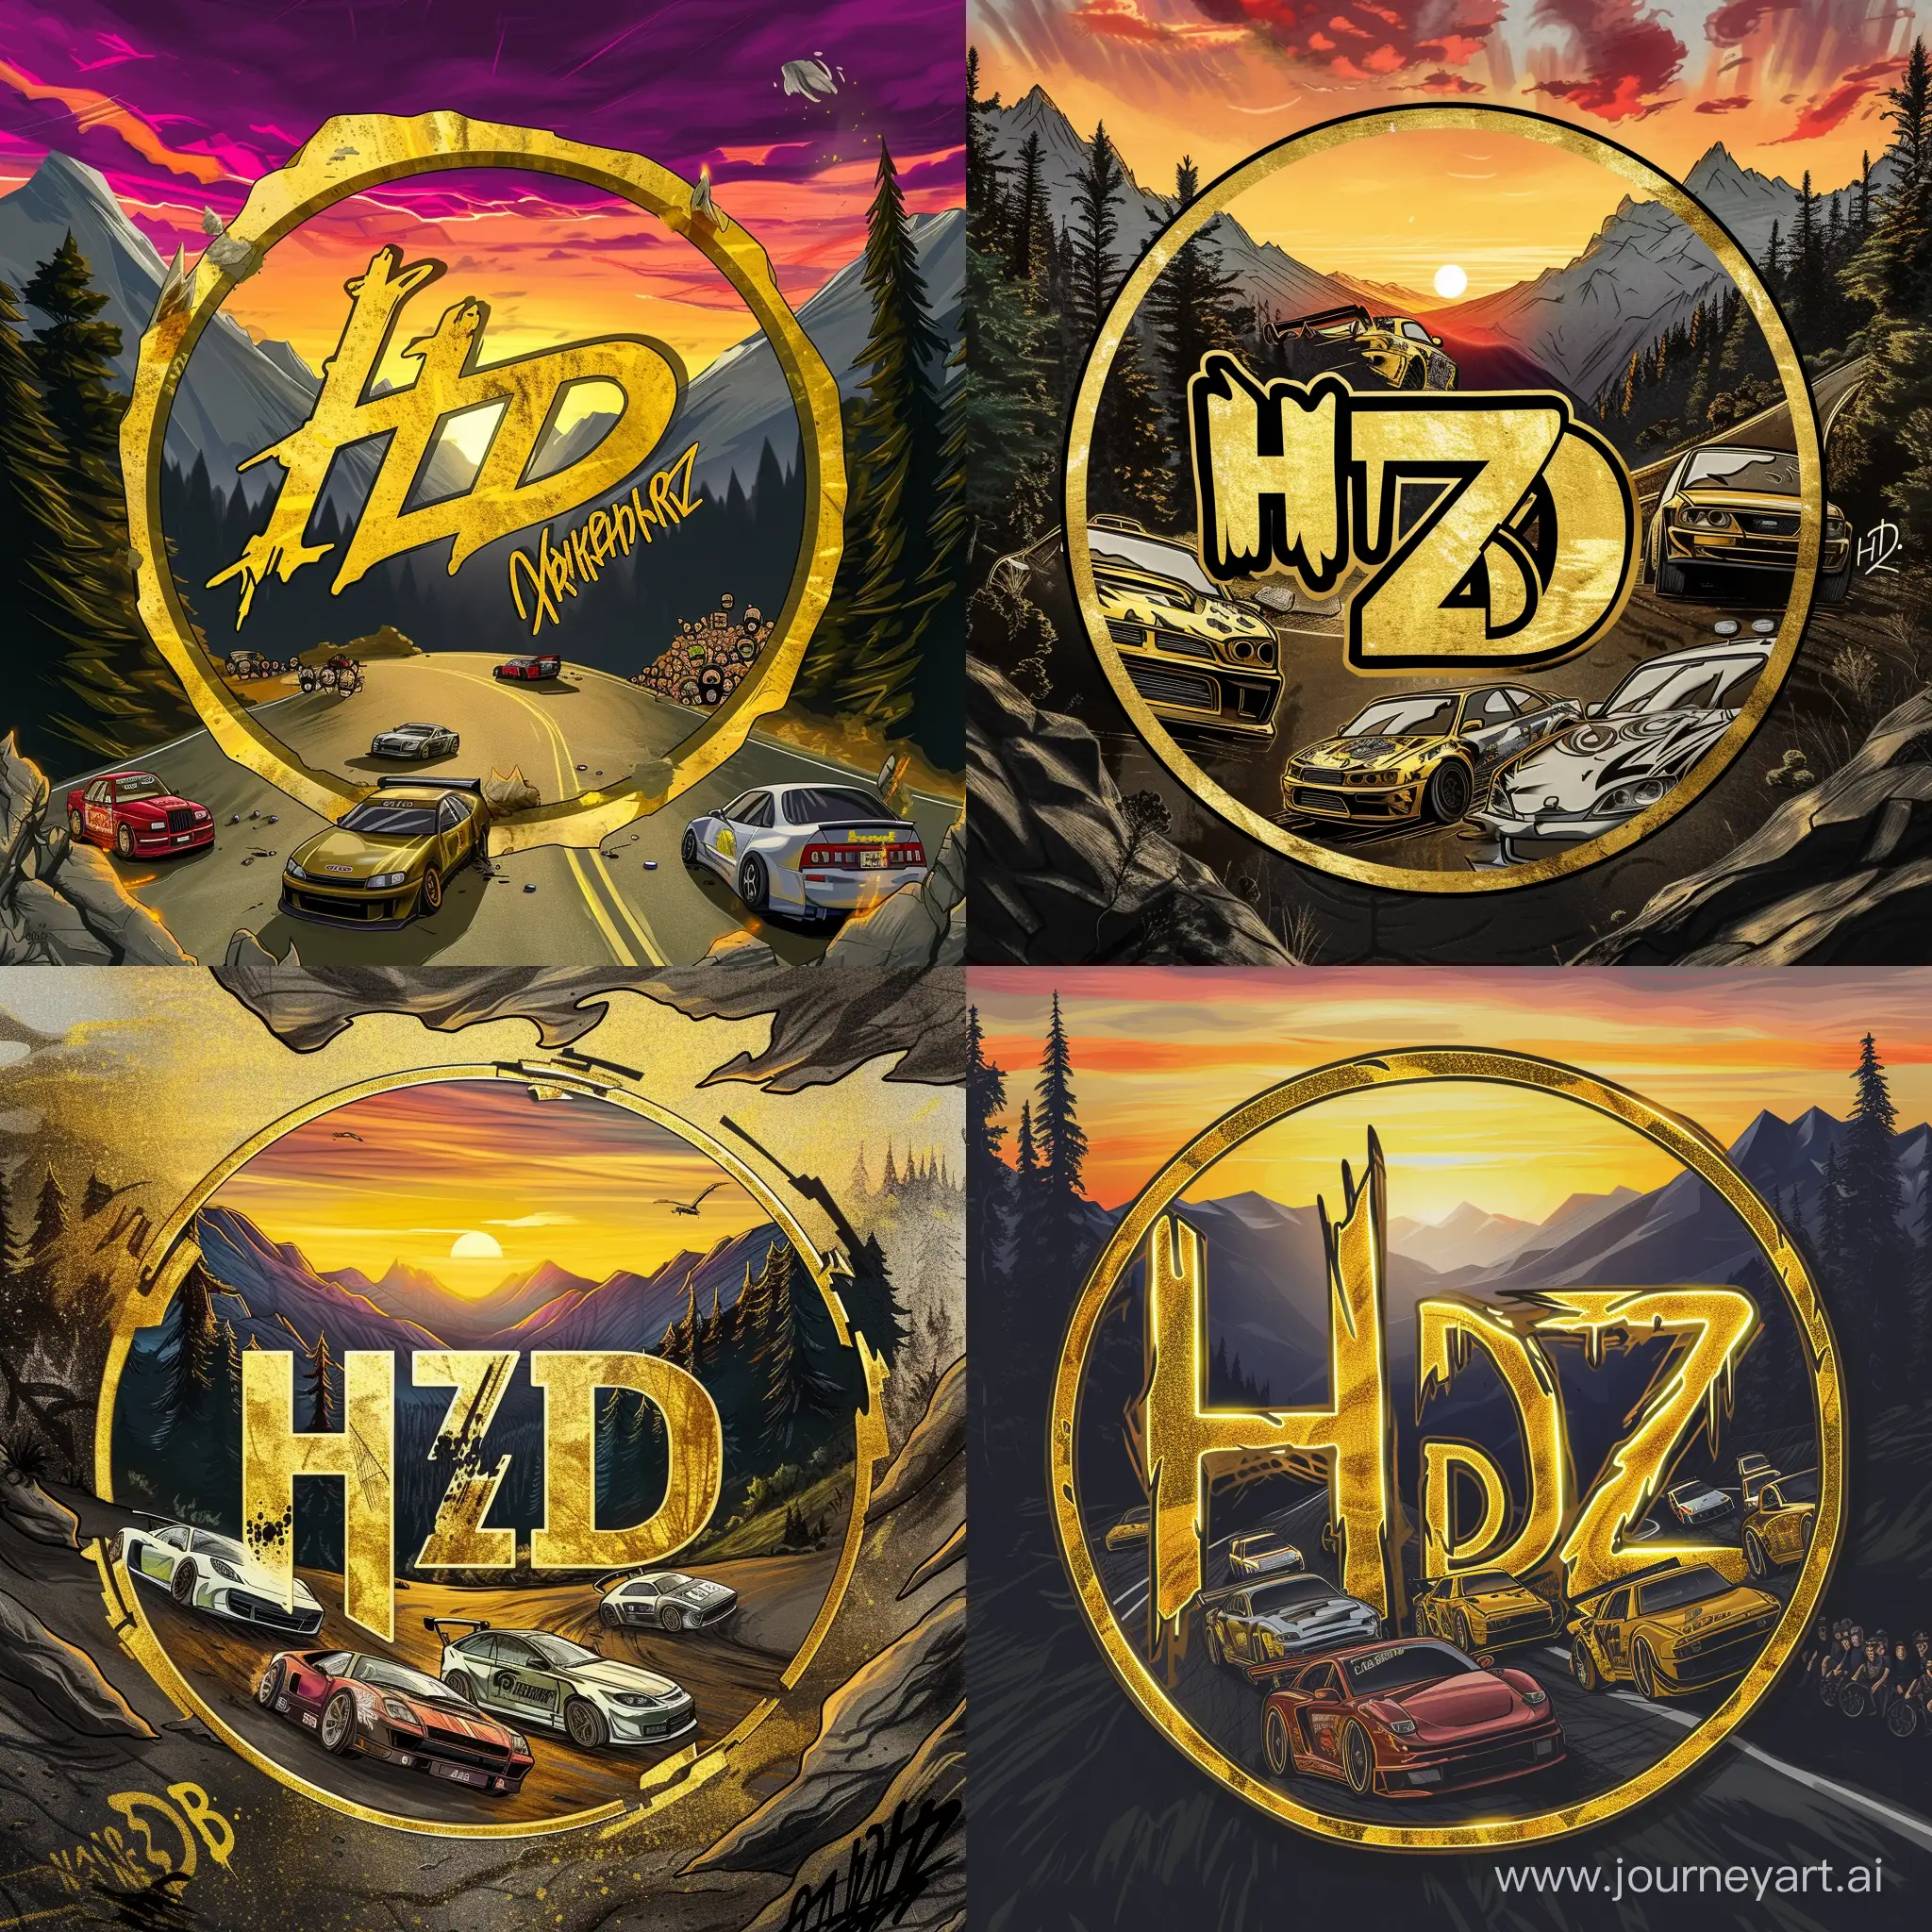 draw style car downhill race logo in circle shape, sunset, some racing cars, some viewers around road, gold color, child style look, HZD tag, graffiti font, mountains with trees with road in backround